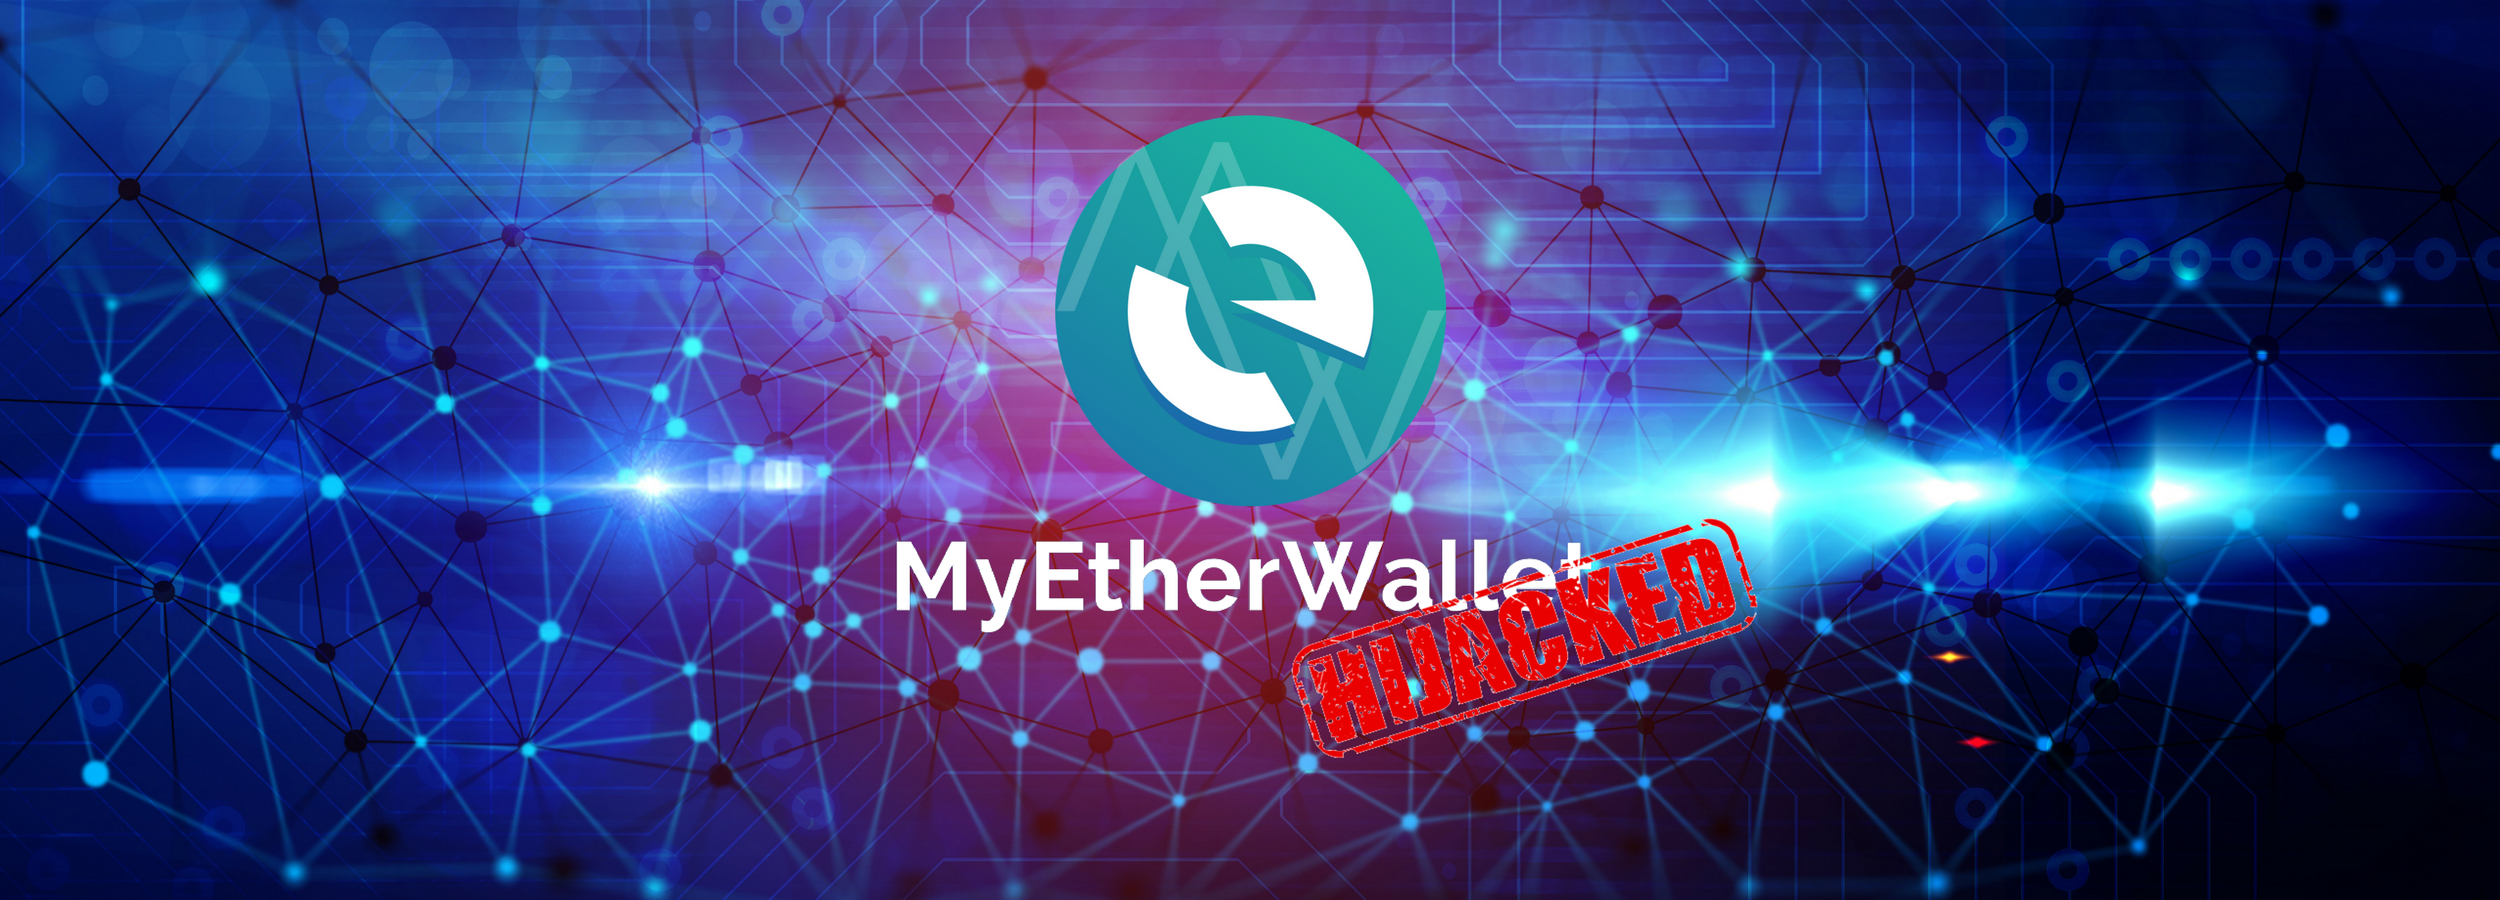 MyEtherWallet (MEW): DNS Servers Breached